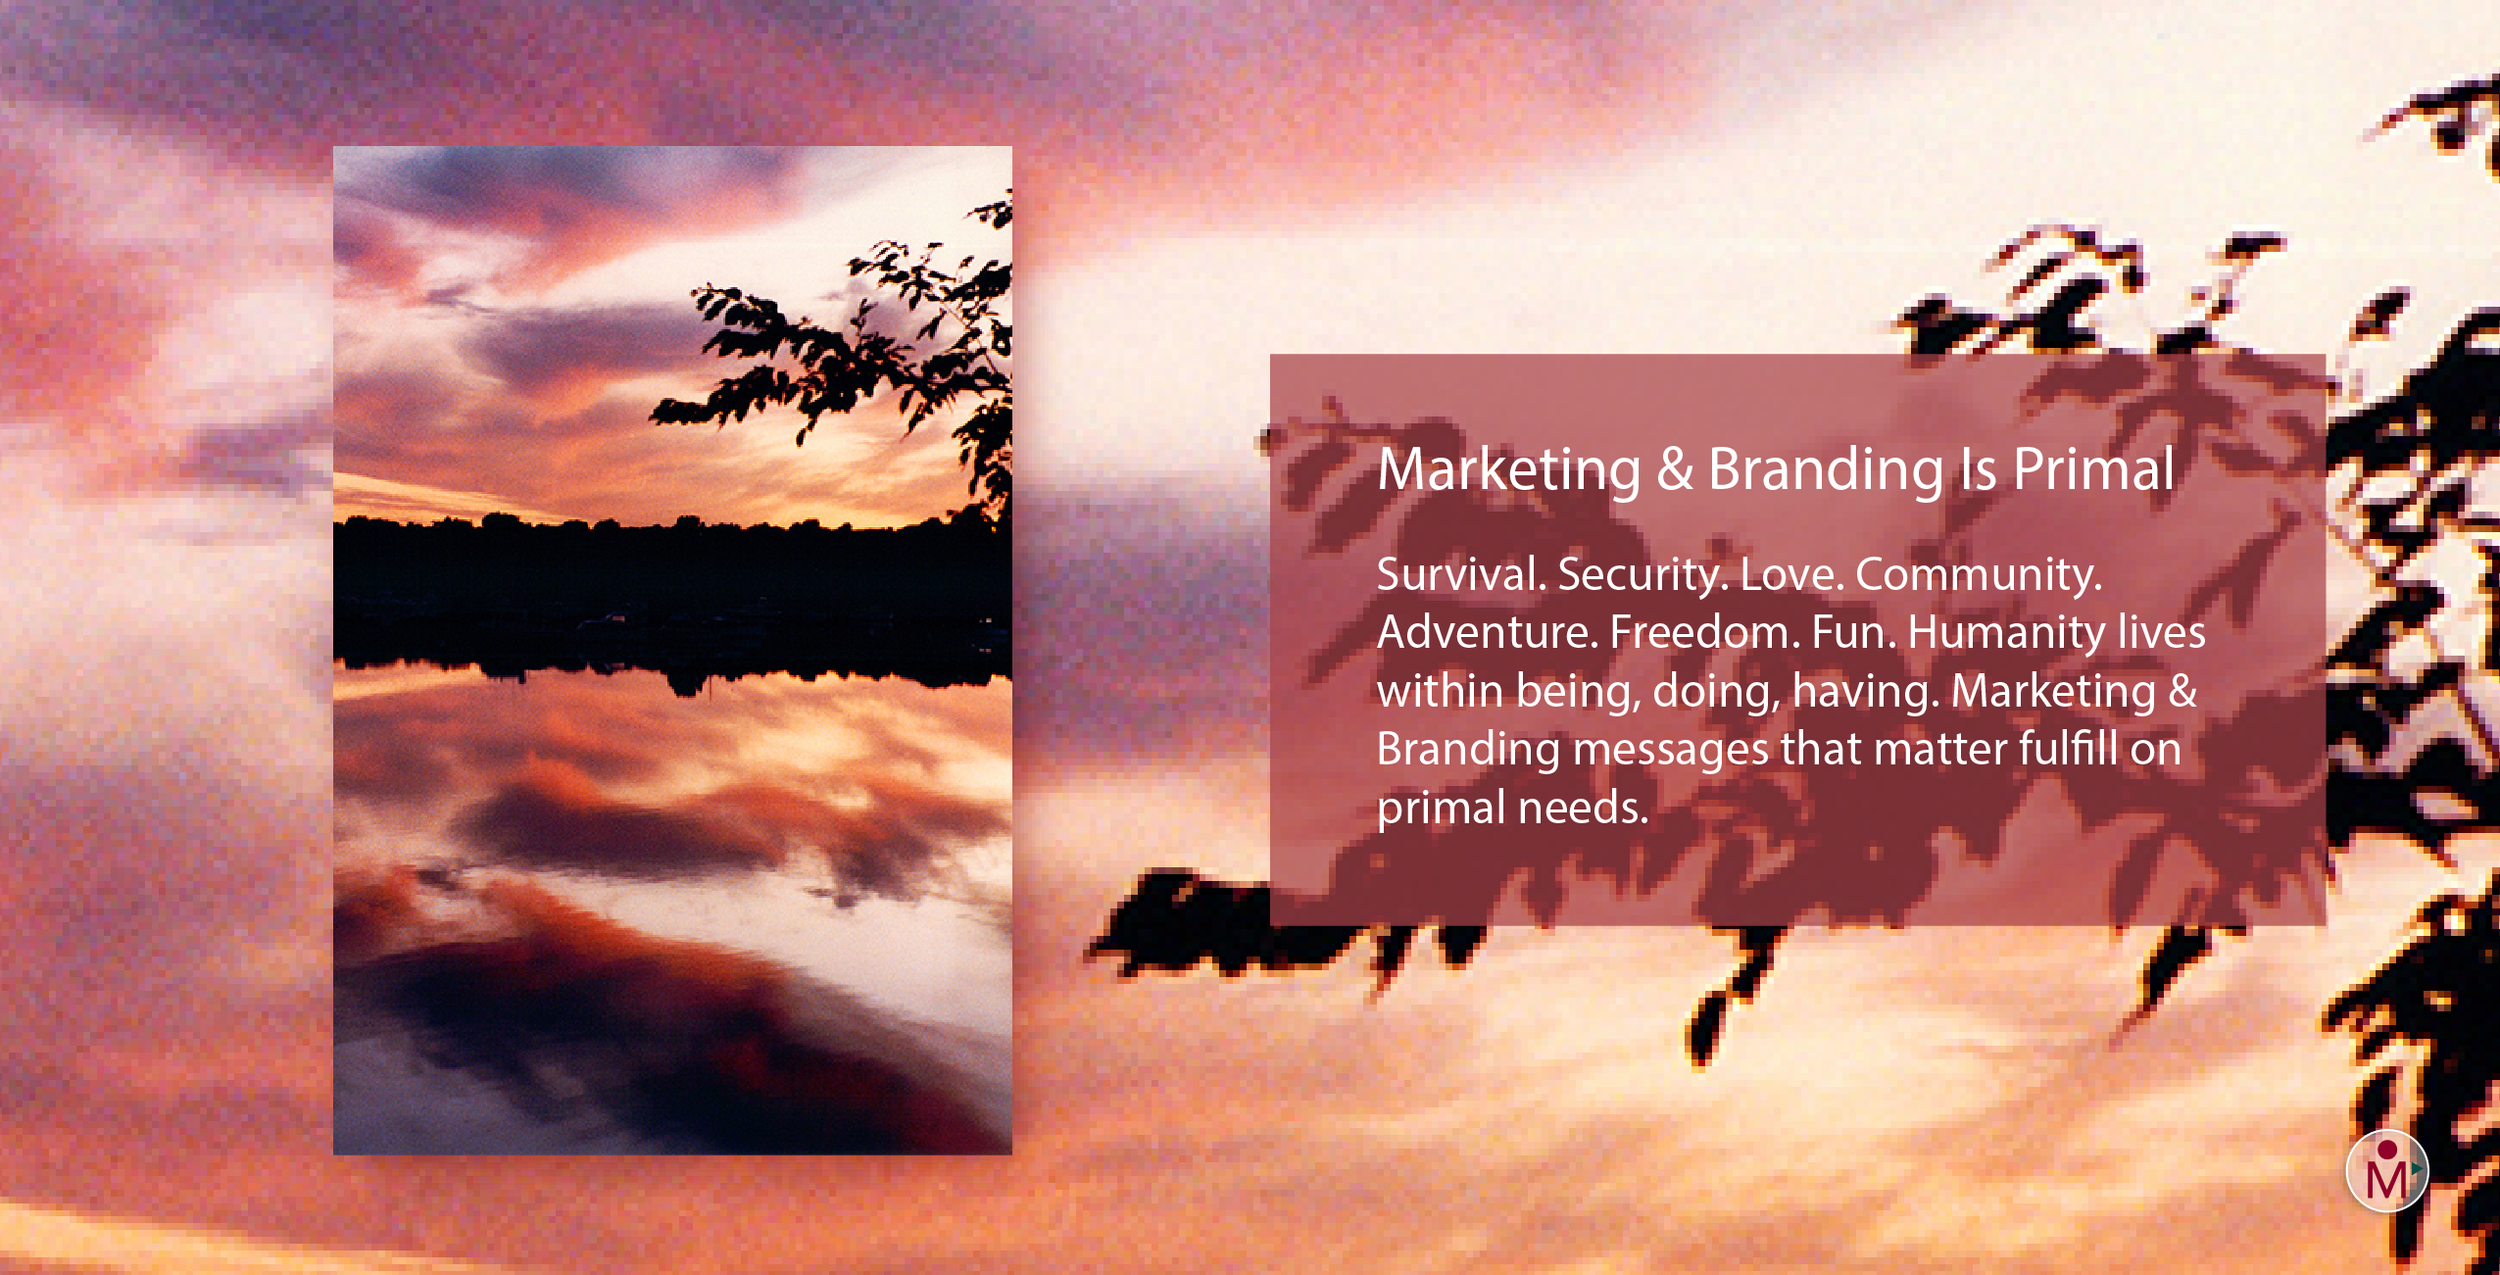 TMD mktg slideshow dac quote 2.png